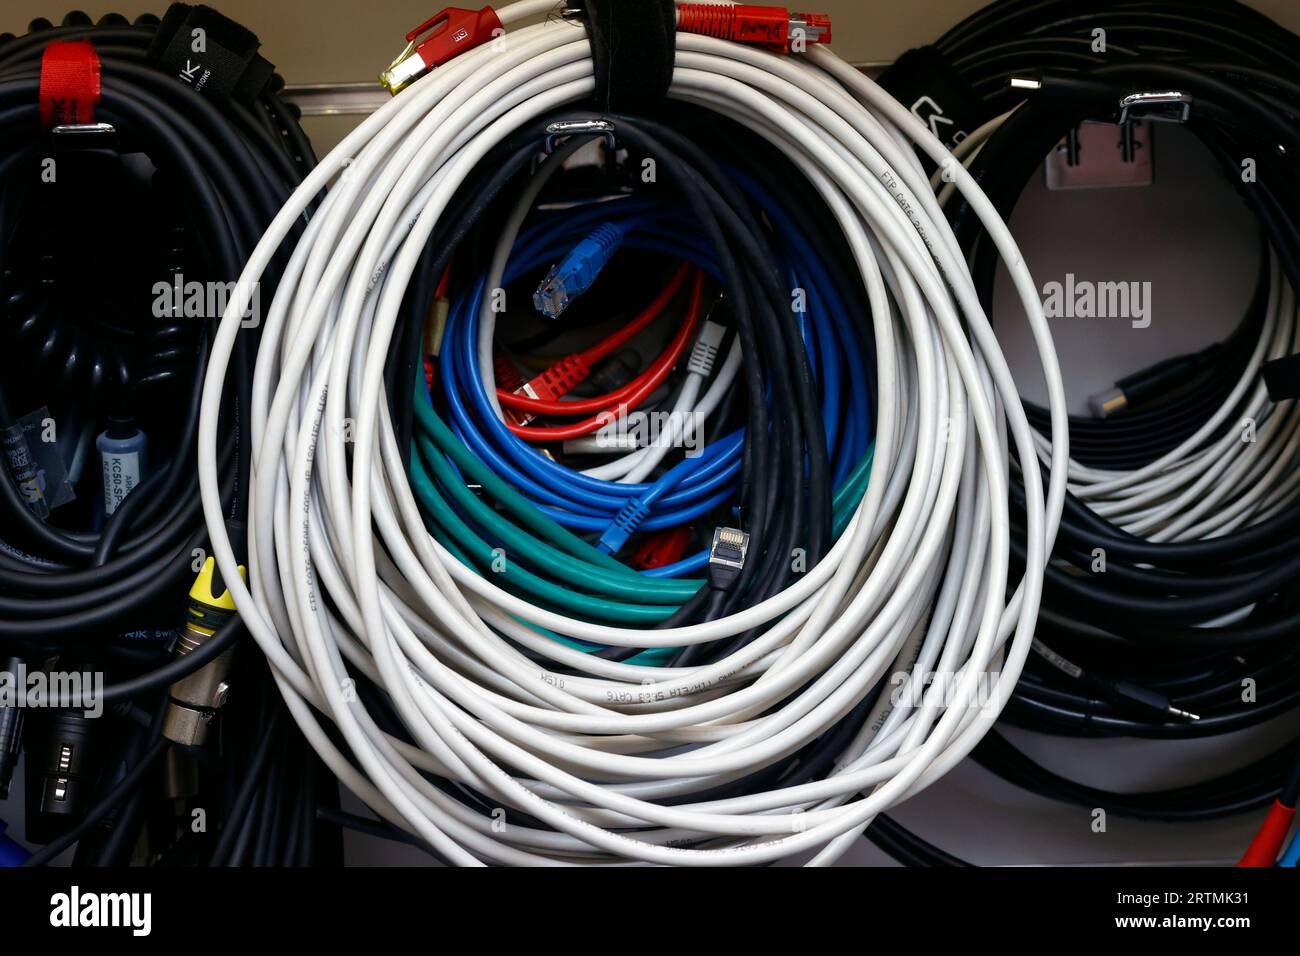 Abstract communication cables background. Wires and connectors for computer audio video.   Saint-Gervais Mont-Blanc. France. Stock Photo